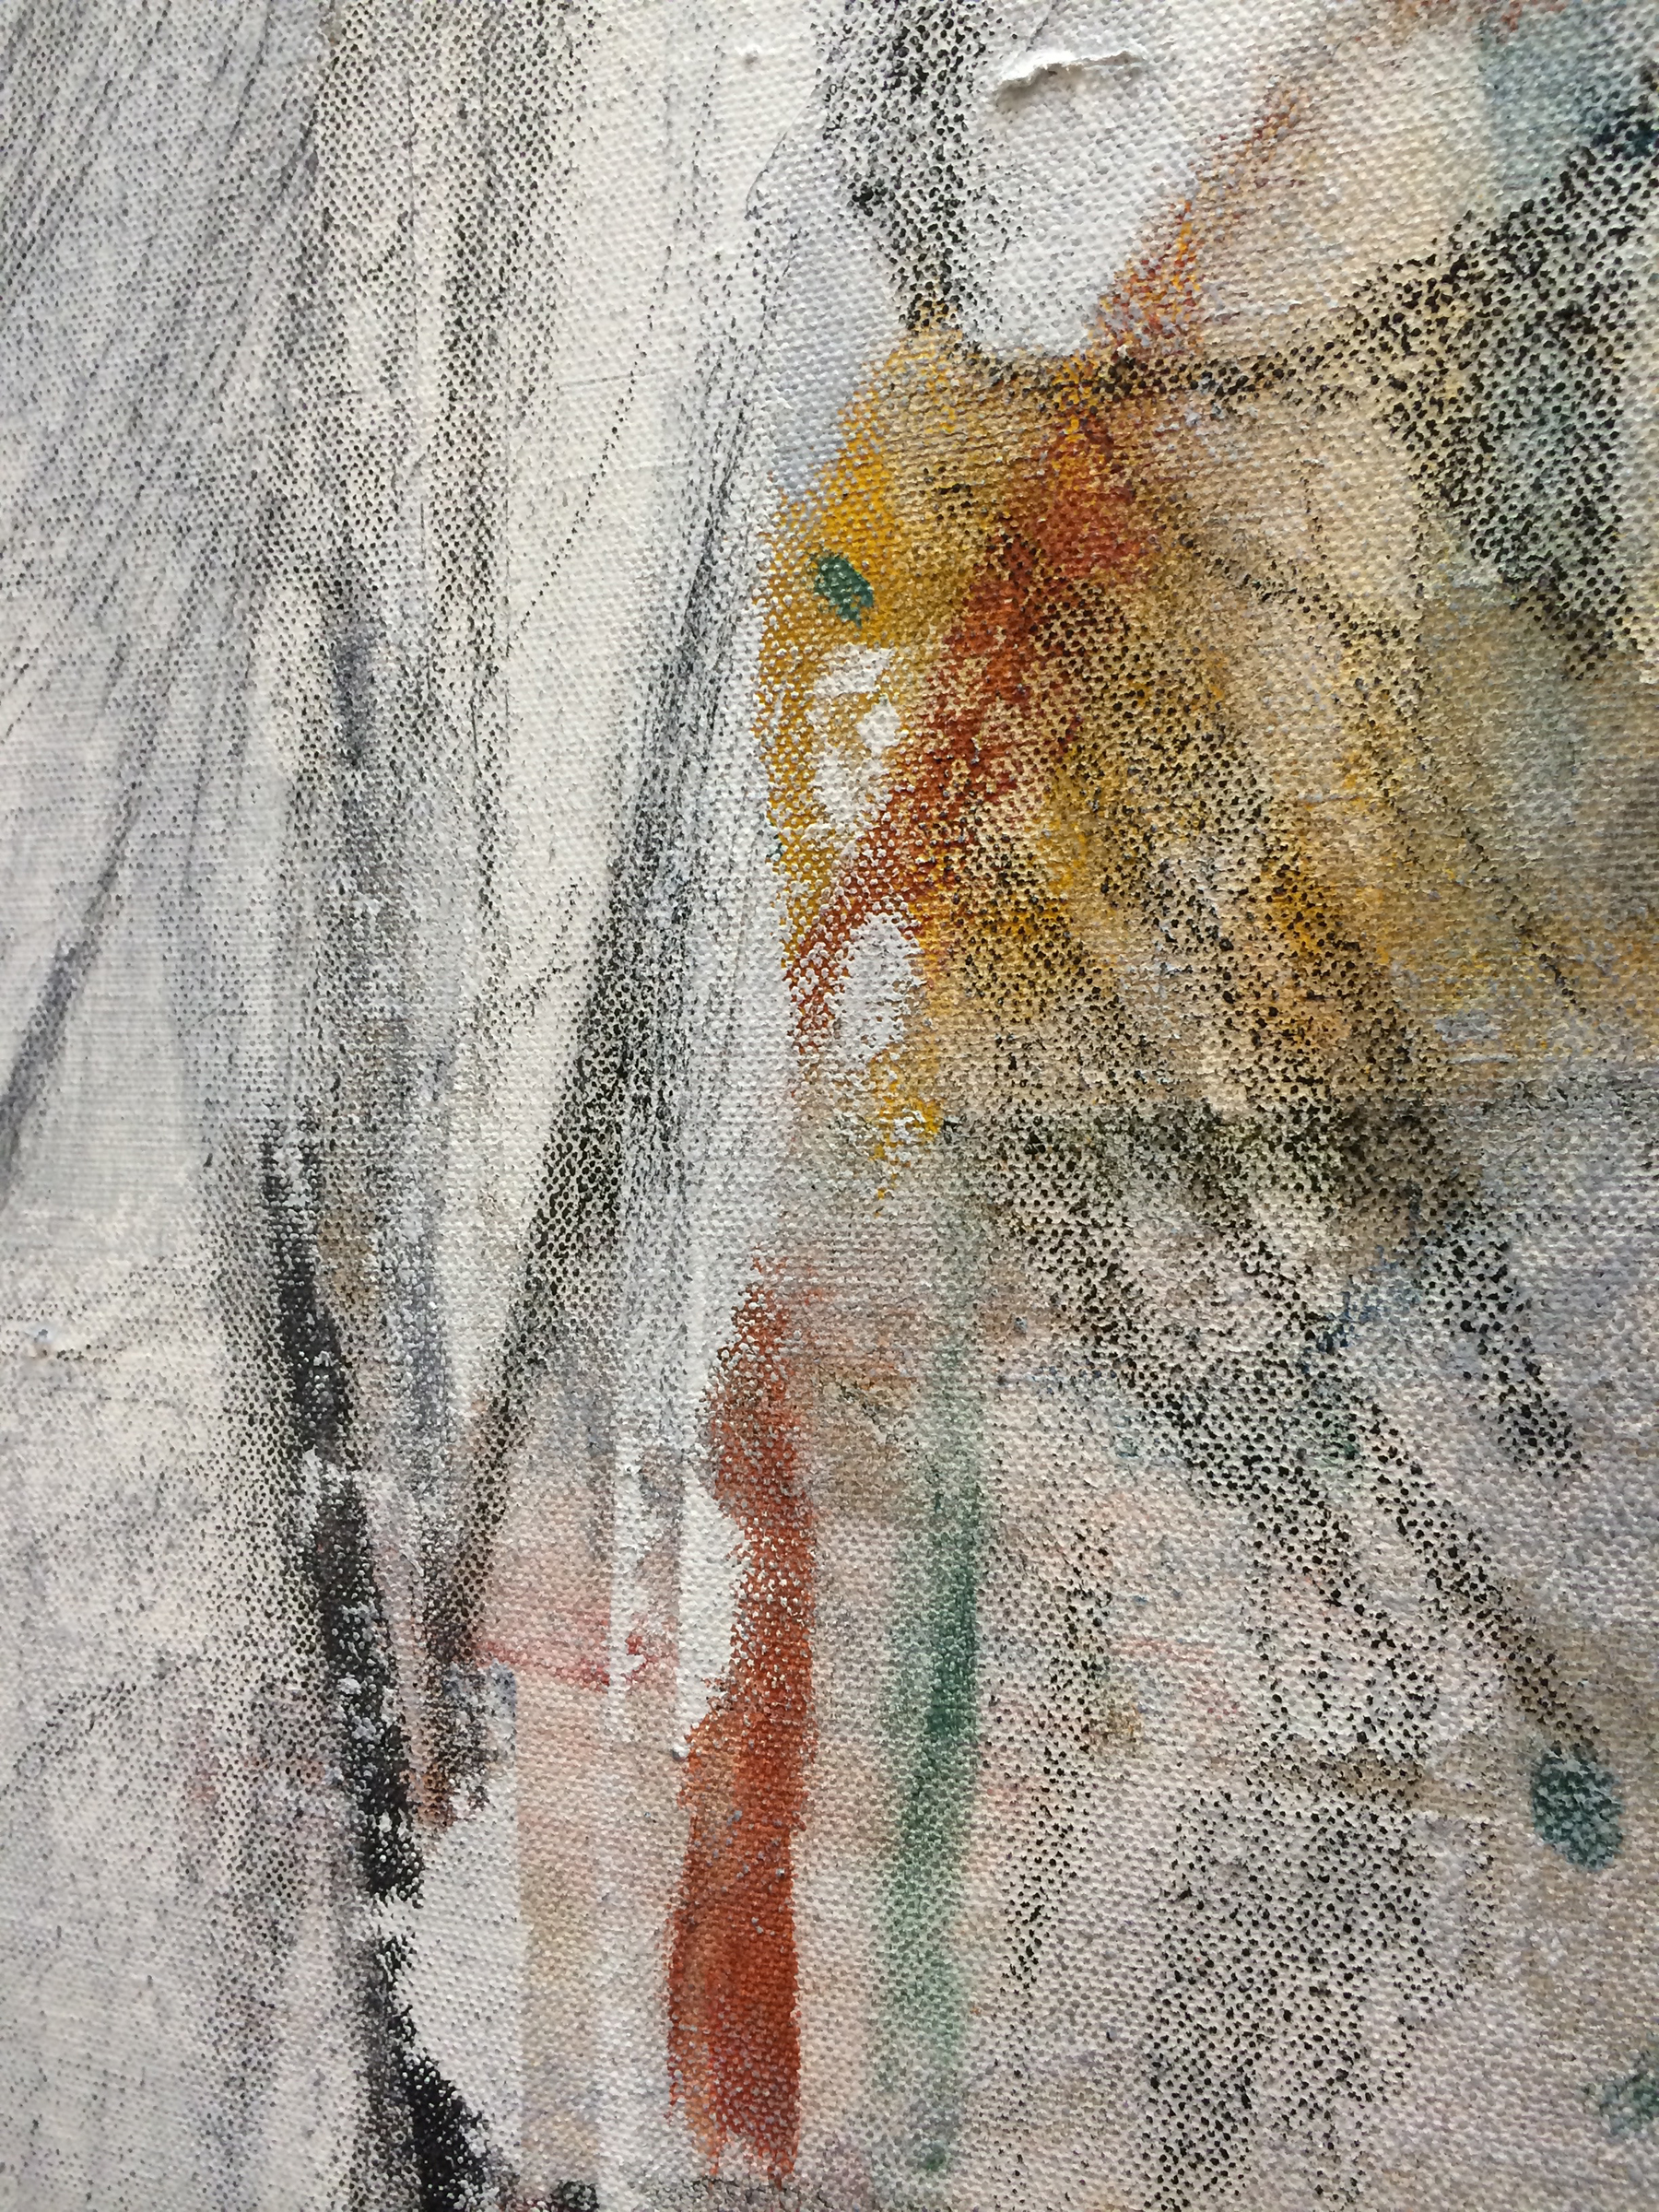   TED GAHL  (detail)&nbsp; Mosquito , 2015, oil, acrylic, graphite and colord pencil on canvas, 36" x 24" 